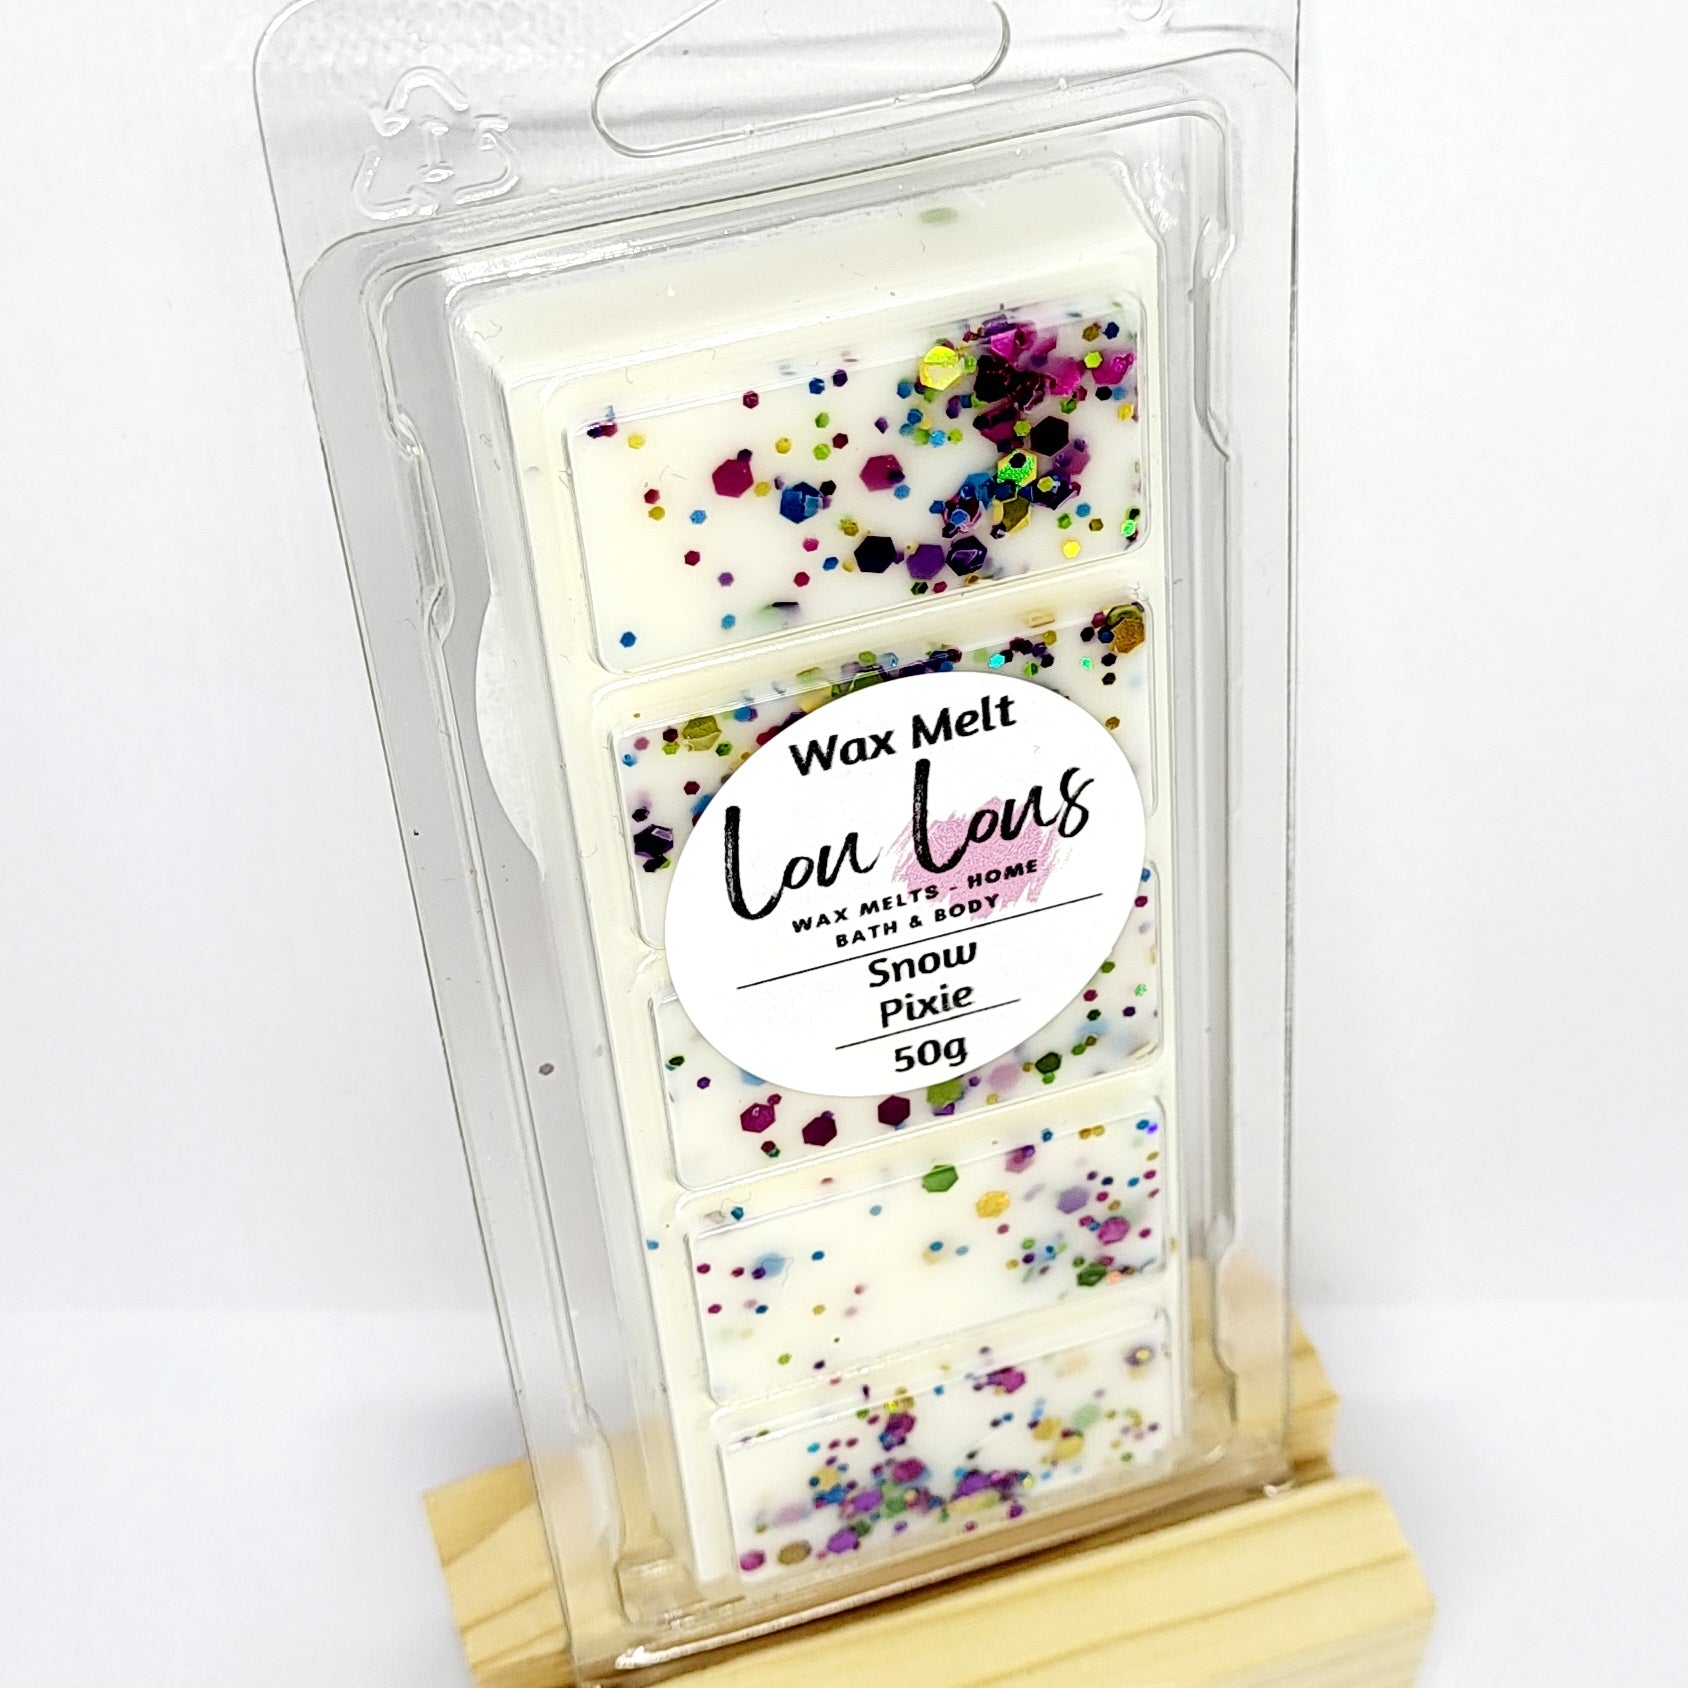 Wax melt snap bar scented in snow pixie